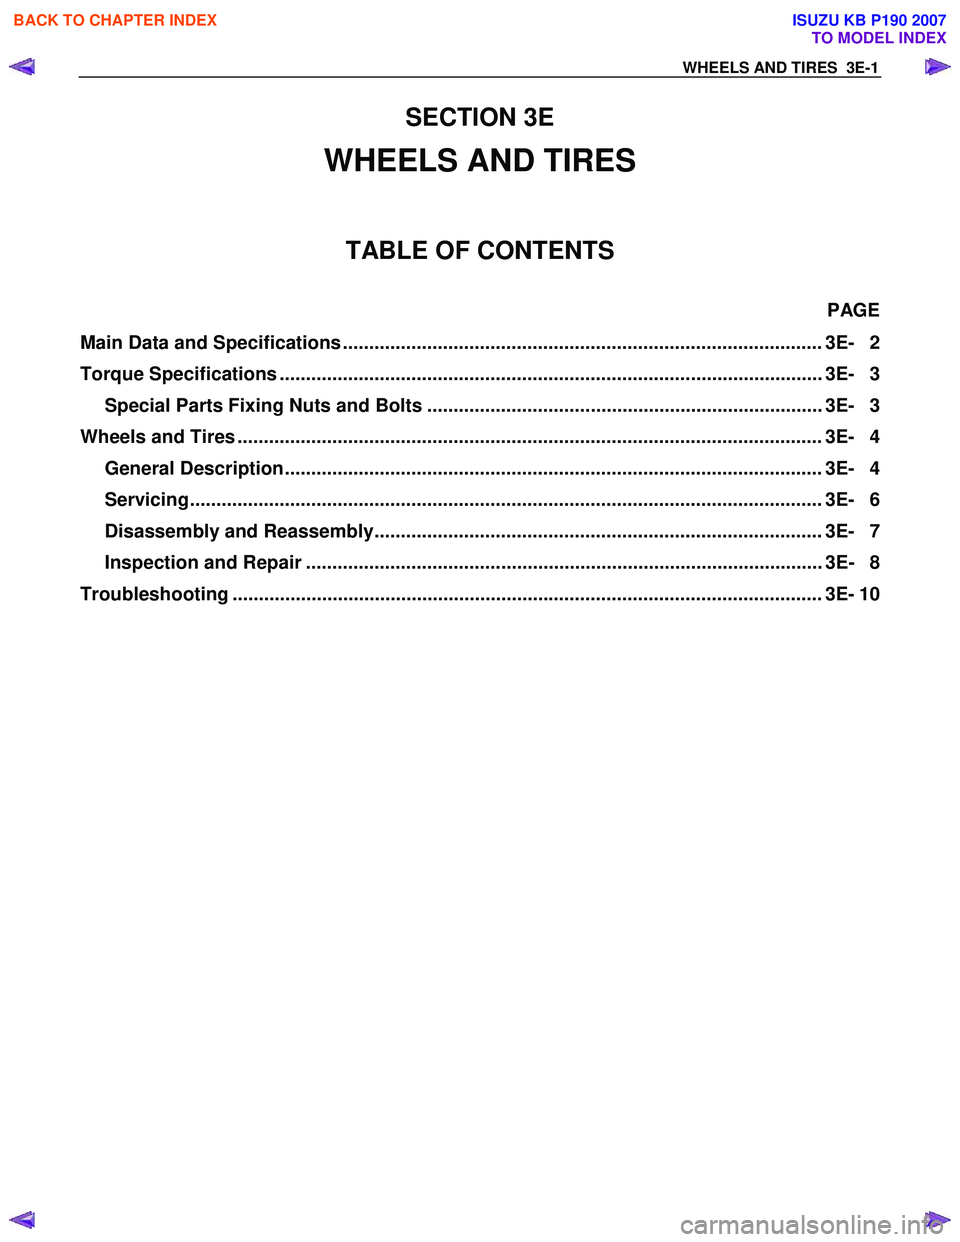 ISUZU KB P190 2007  Workshop Repair Manual WHEELS AND TIRES  3E-1 
SECTION 3E 
WHEELS AND TIRES 
TABLE OF CONTENTS 
 PAGE 
Main Data and Specifications ...........................................................................................